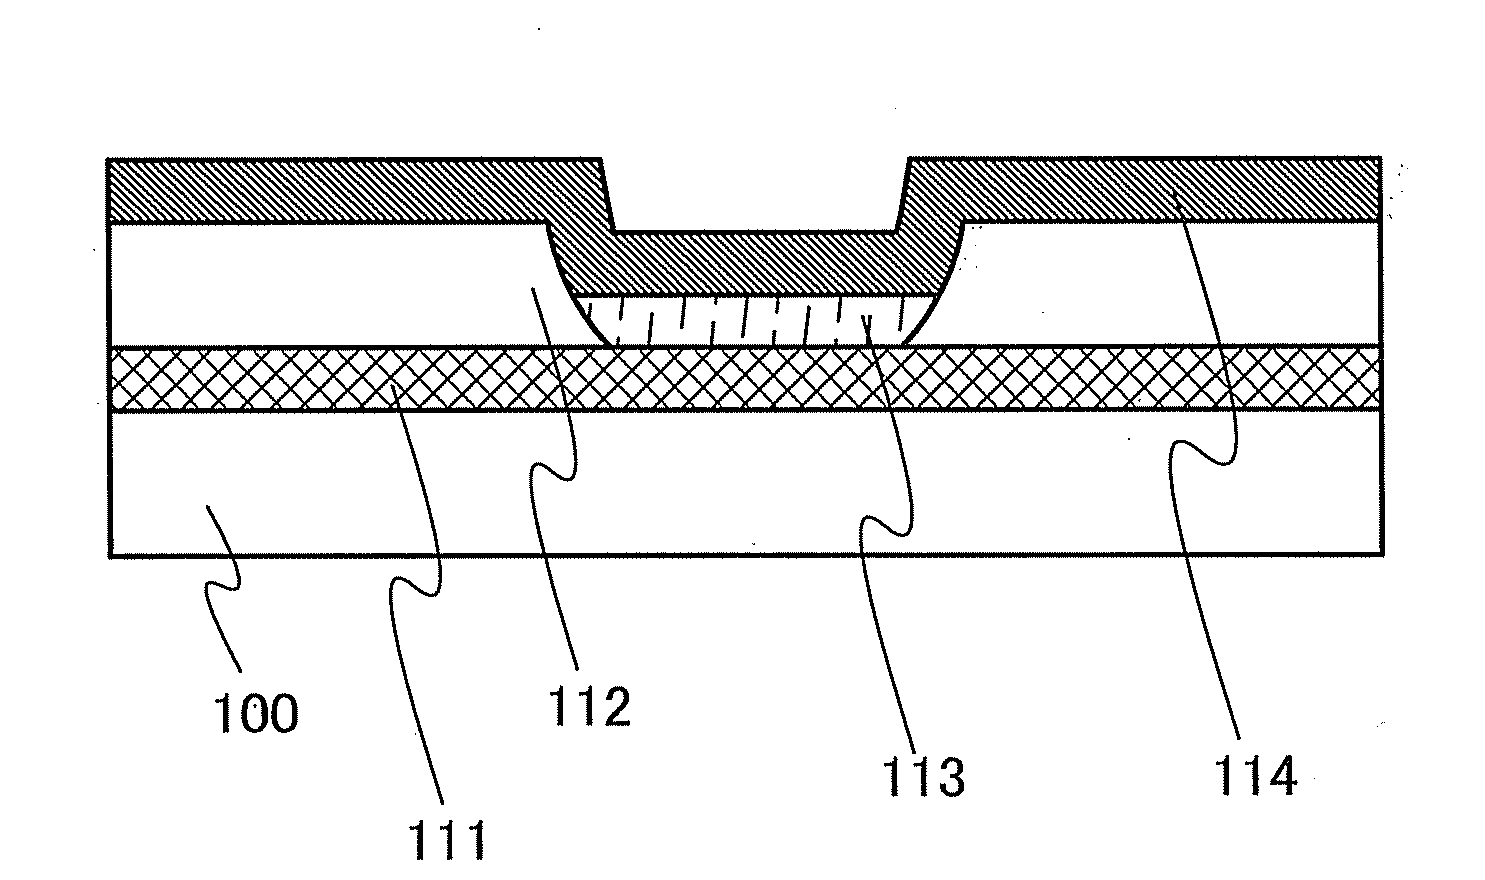 Light-Emitting Element, Manufacturing Method Thereof, and Lighting Device